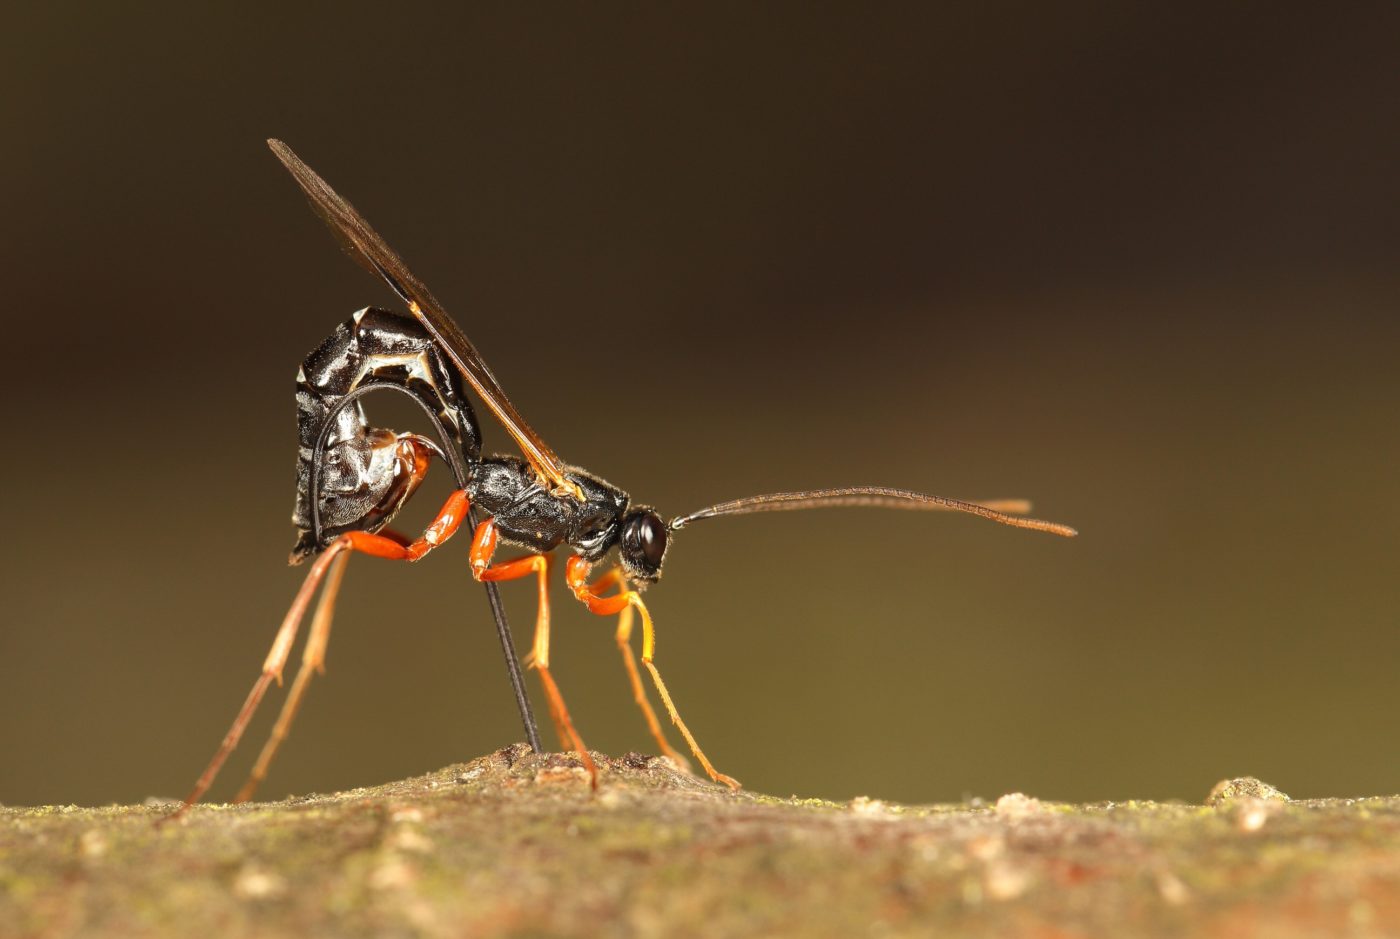 A female ichneumon wasp drills into wood with her ovipositor.